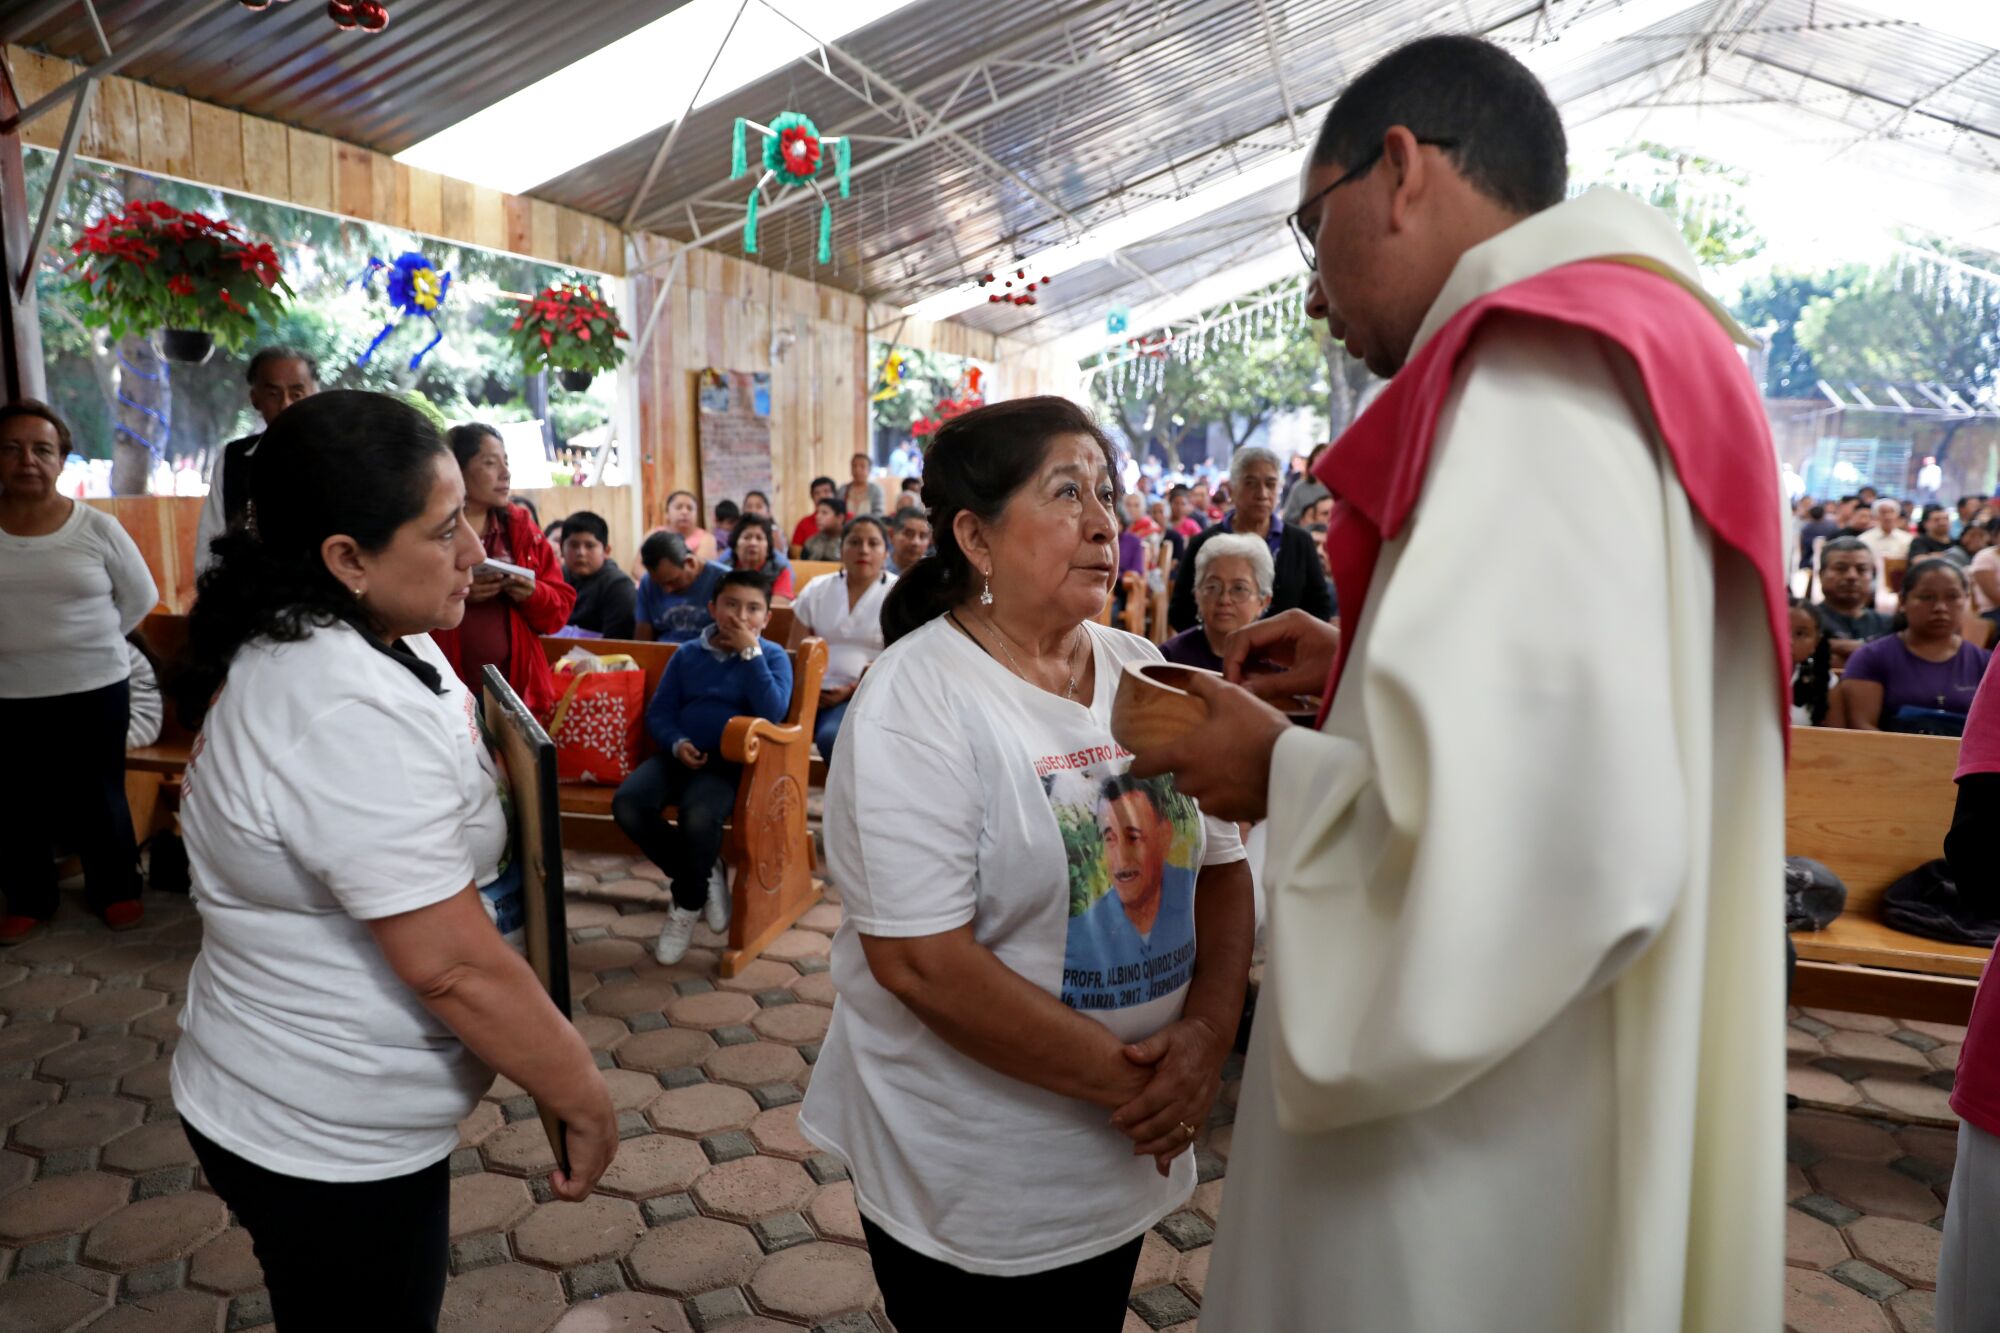 Maricela Peñaloza Flores, center, with daughter Georgina Quiroz Peñaloza, asks the priest if she can make an announcement about her husband in Tepoztlán, Mexico, on Dec. 15.